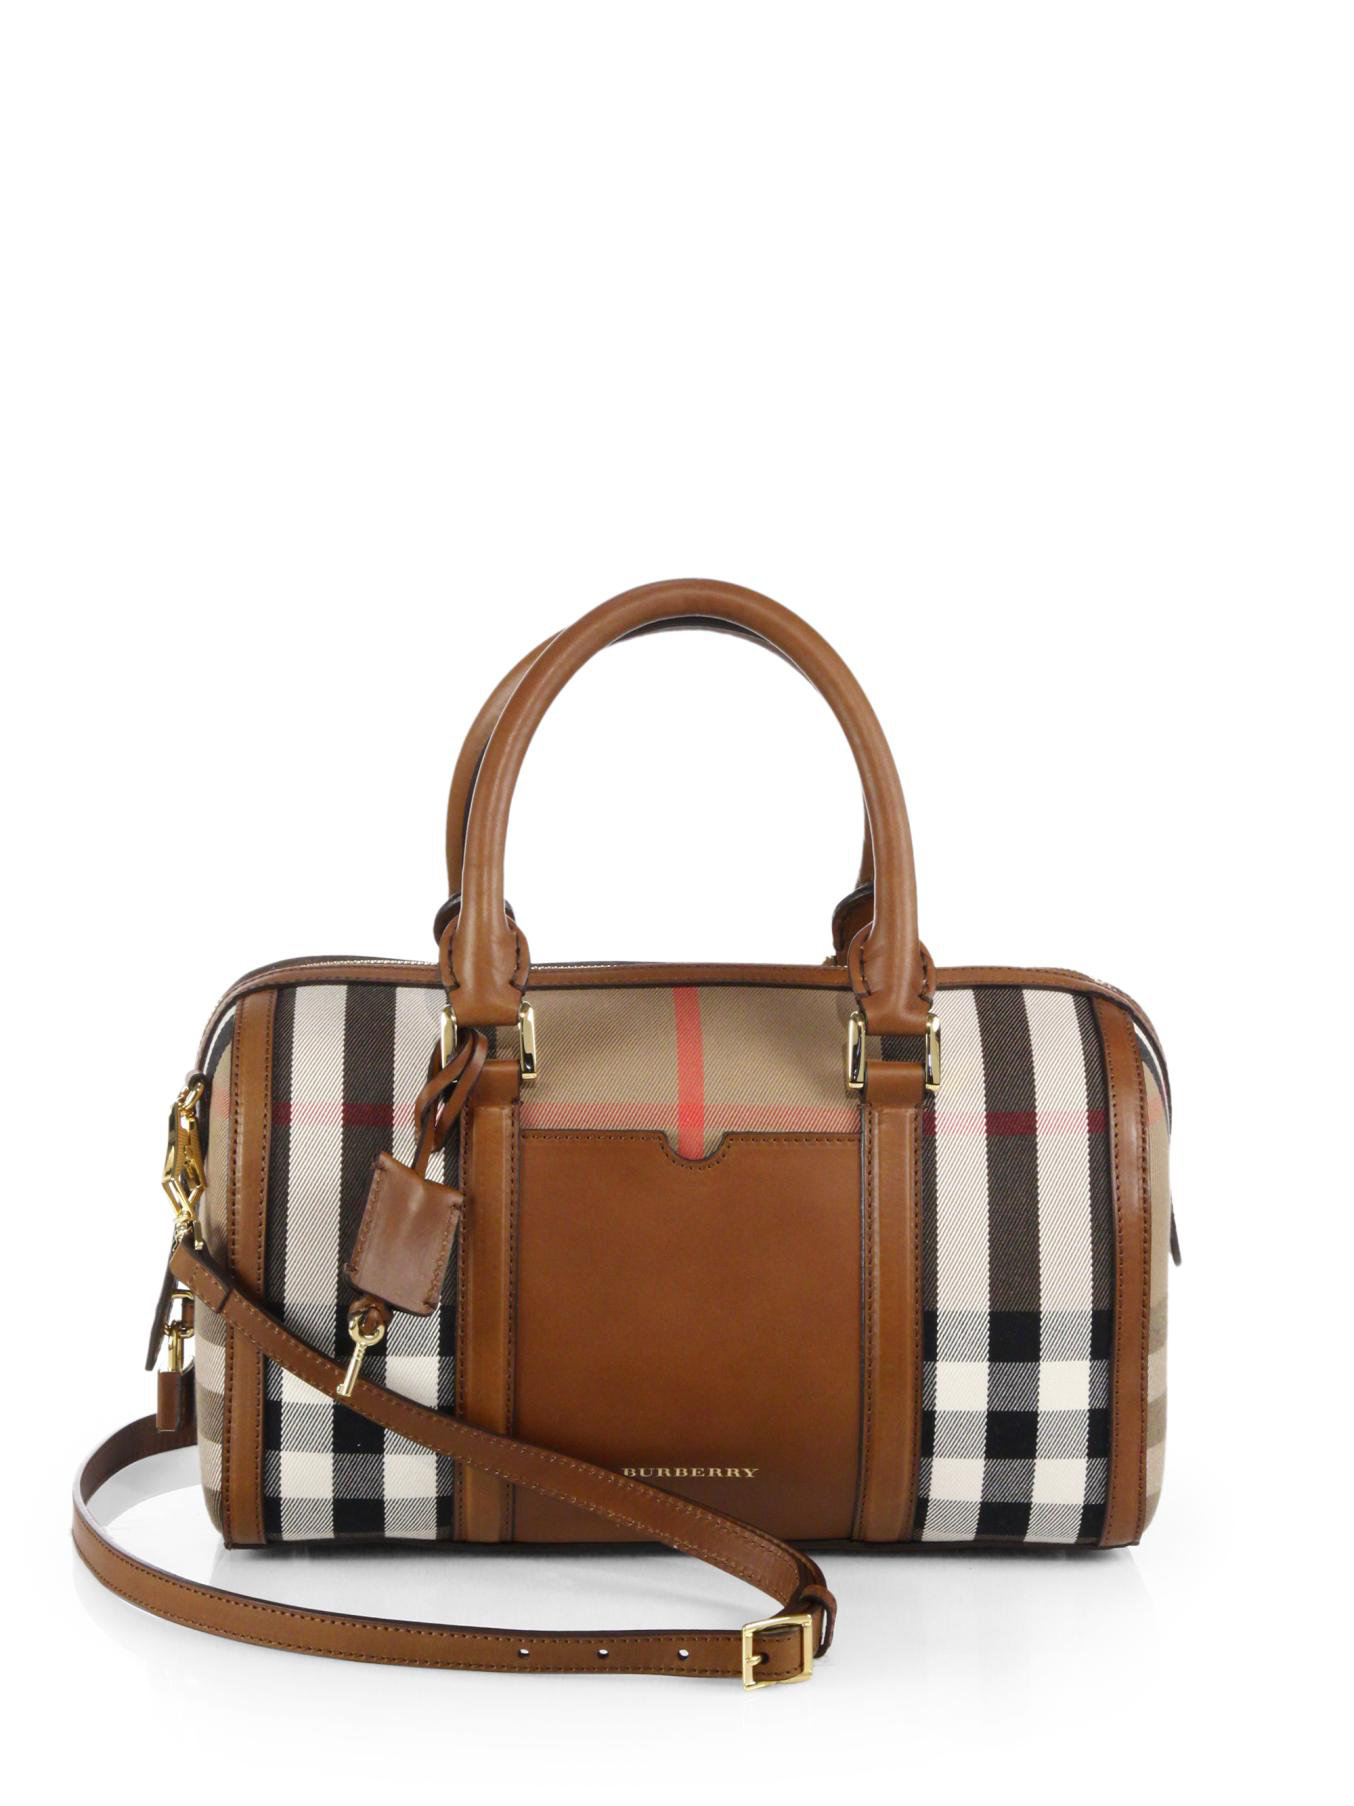 Burberry Alchester Canvas Bowler Bag in Brown - Lyst